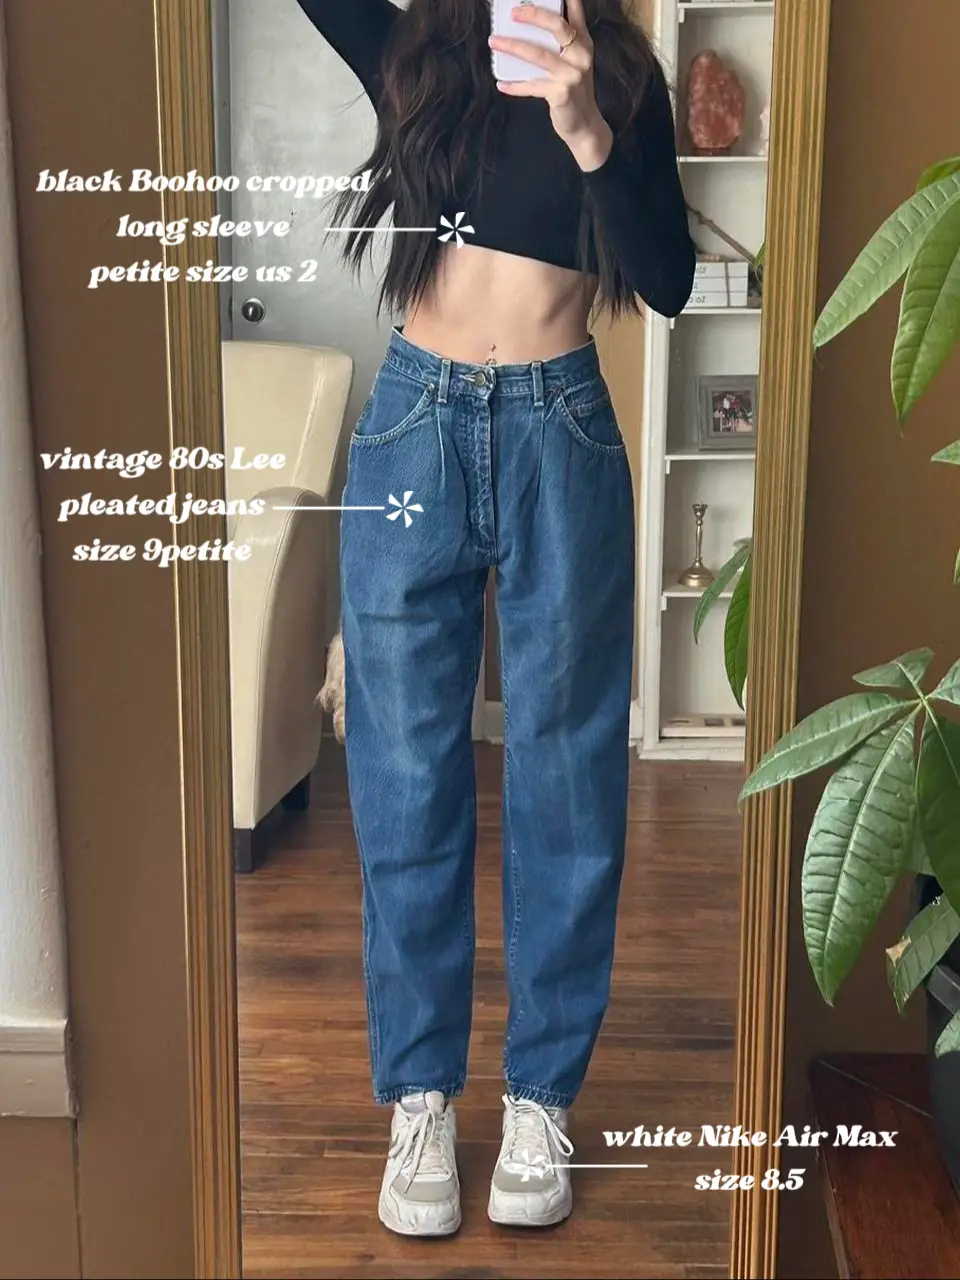 My Favorite y2k Pants, Gallery posted by Abby